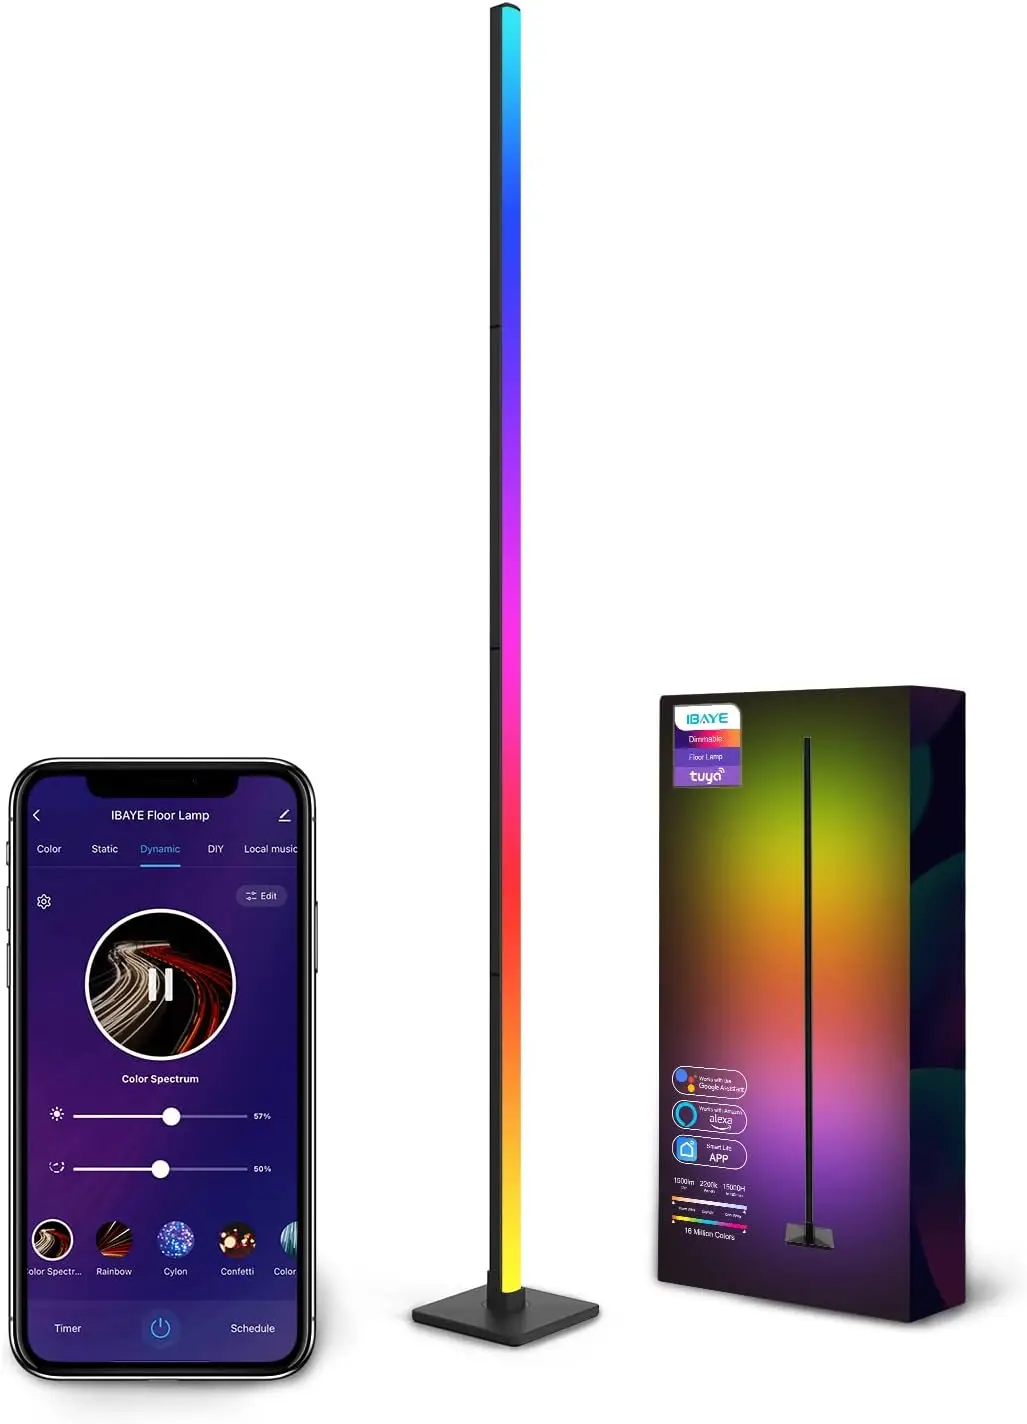 

Floor Lamp,LED Smart Floor Lamp,16 Million Colors, DIY & Scene Mode,Music Sync,compatible with Google Assistant and Alexa,Wi Nog